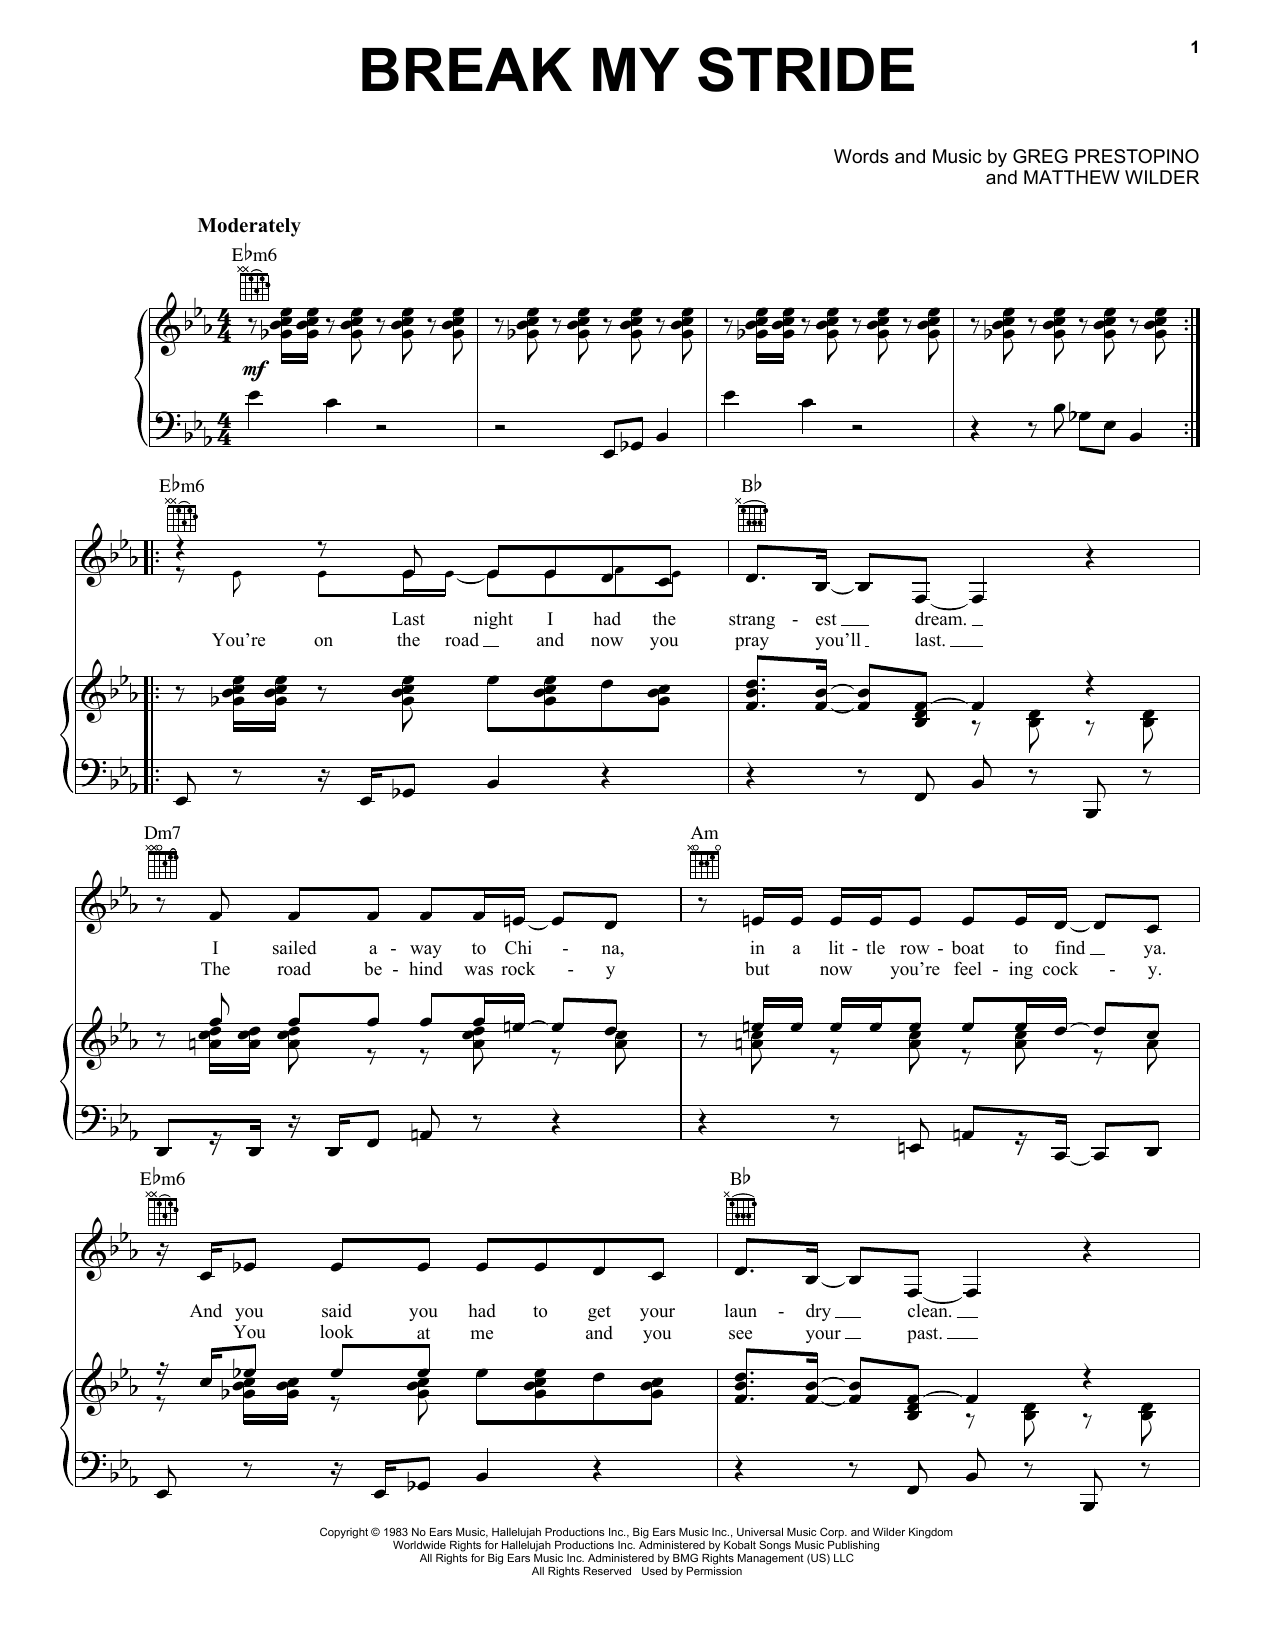 Matthew Wilder Break My Stride sheet music notes and chords - Download Printable PDF and start playing in minutes.